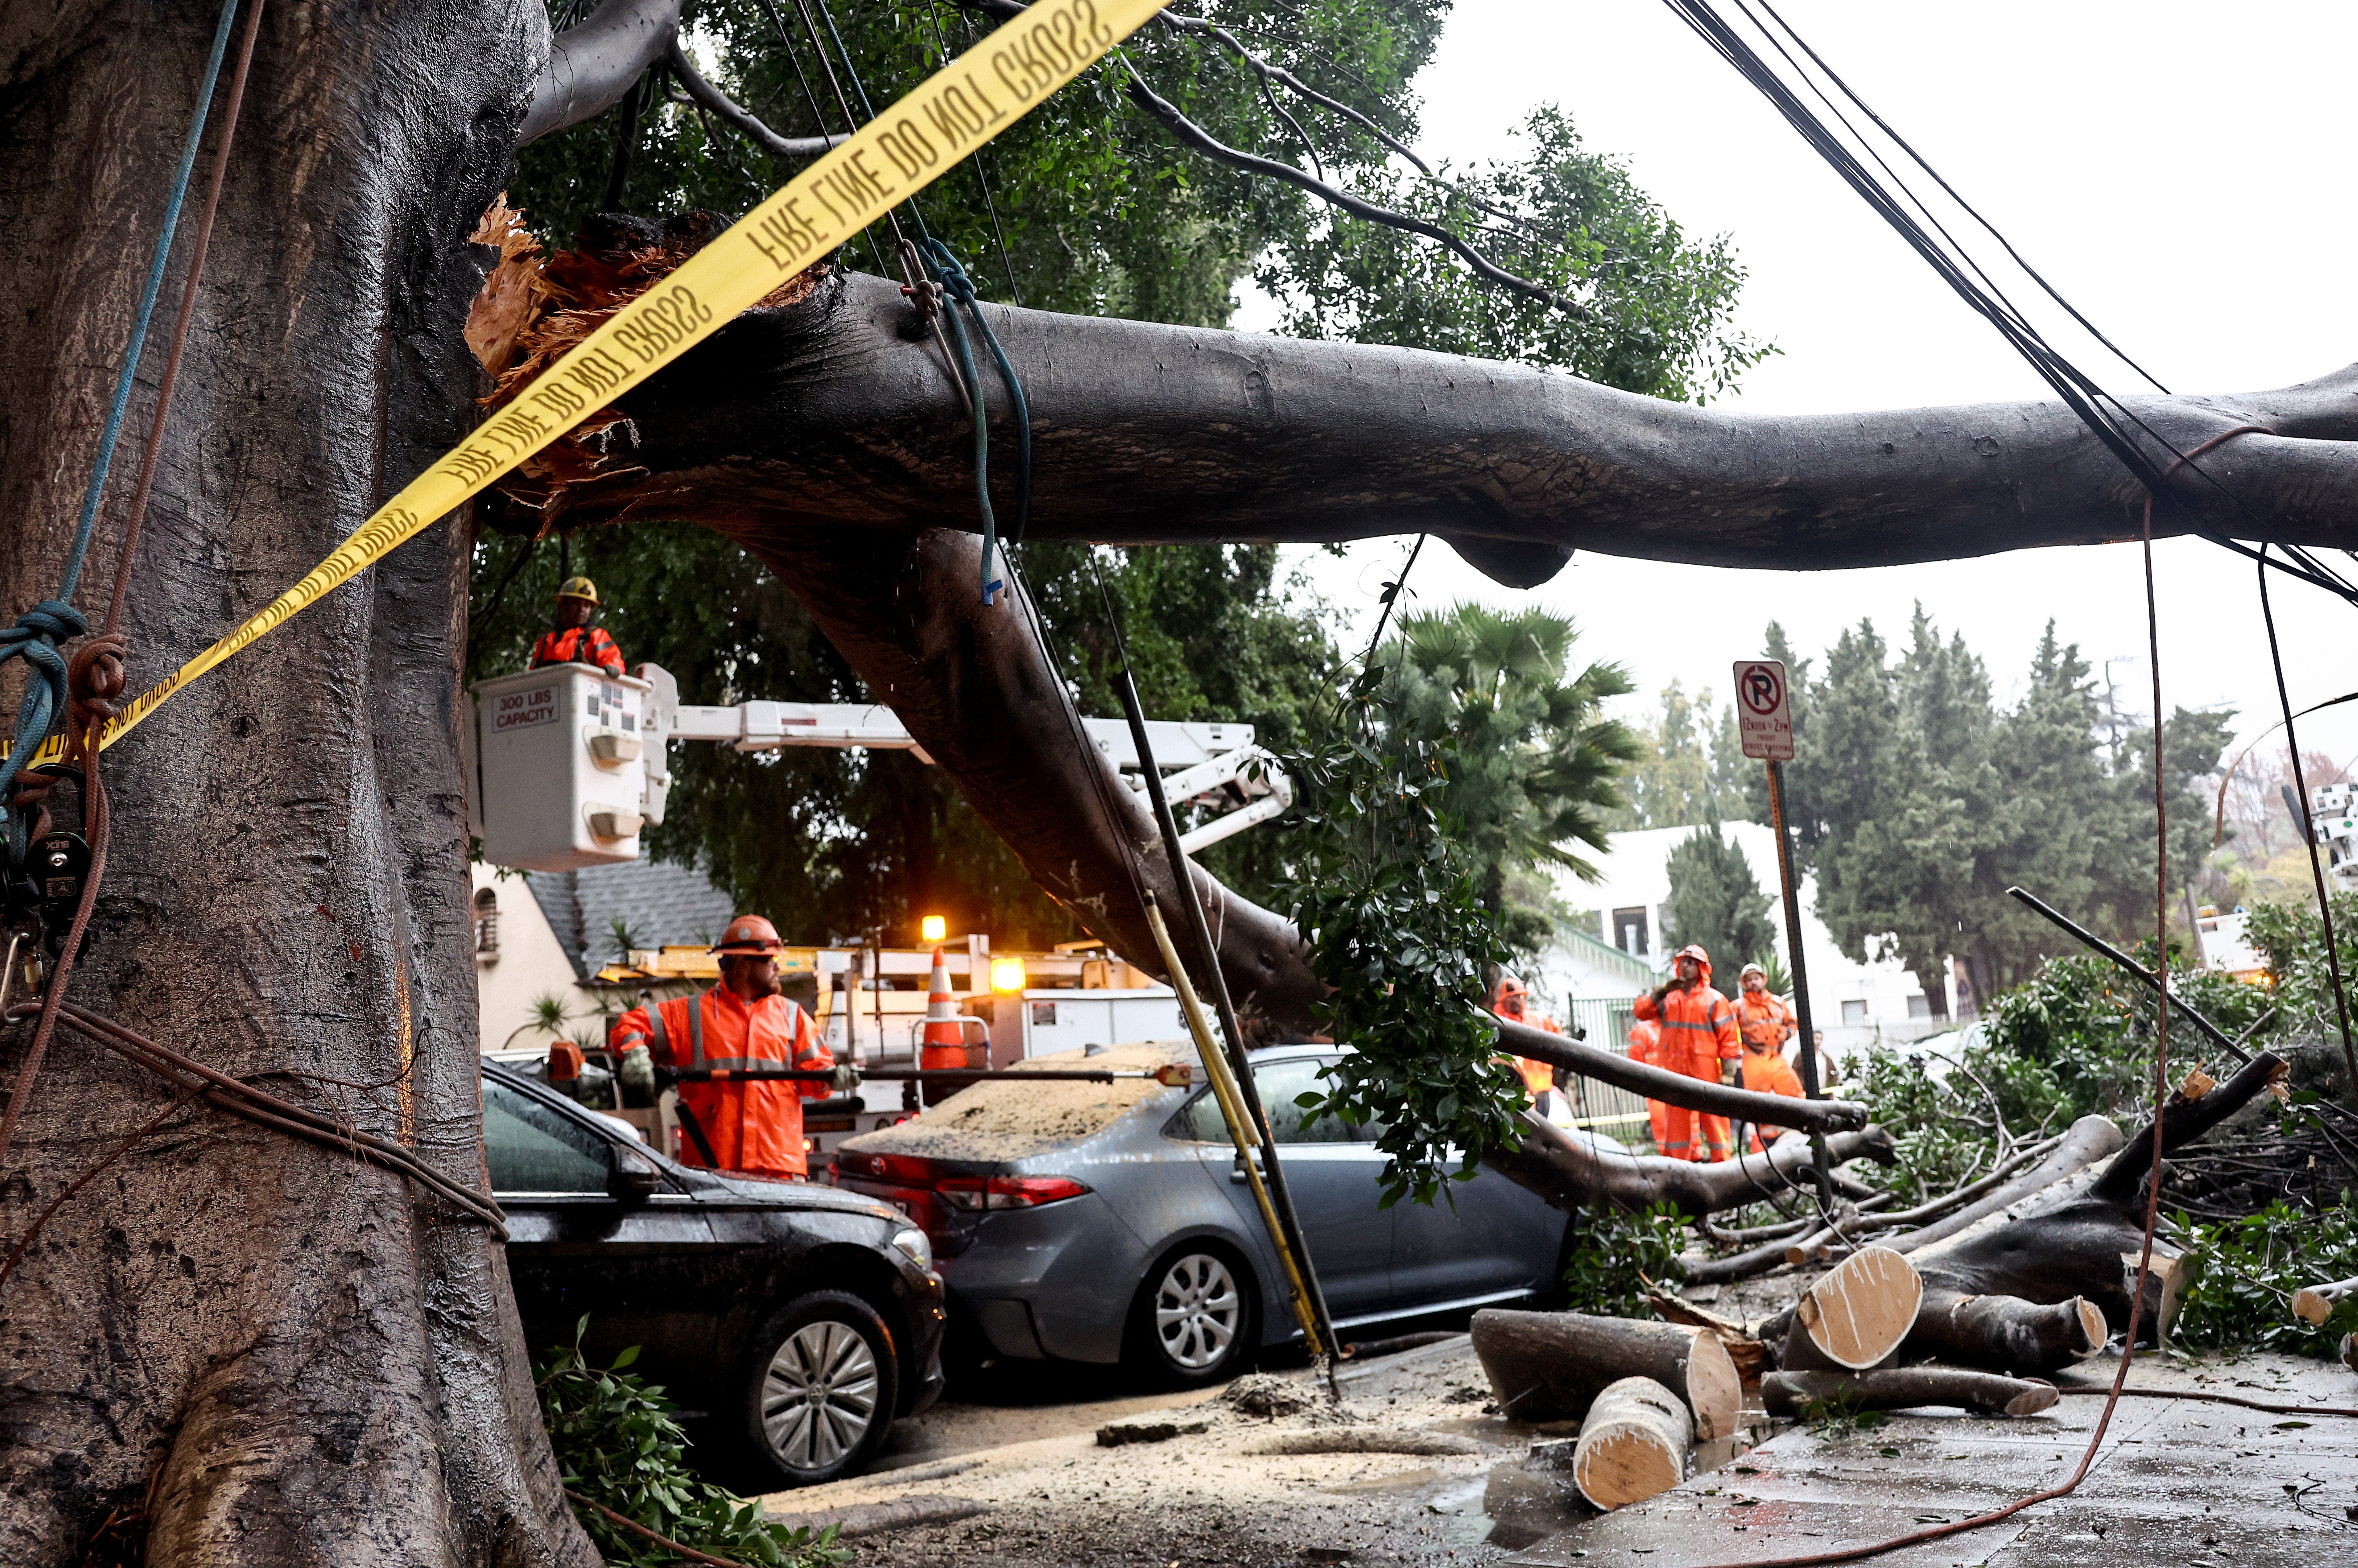 High winds and heavy rain caused trees like this one to fall throughout California, causing damage to property and power lines